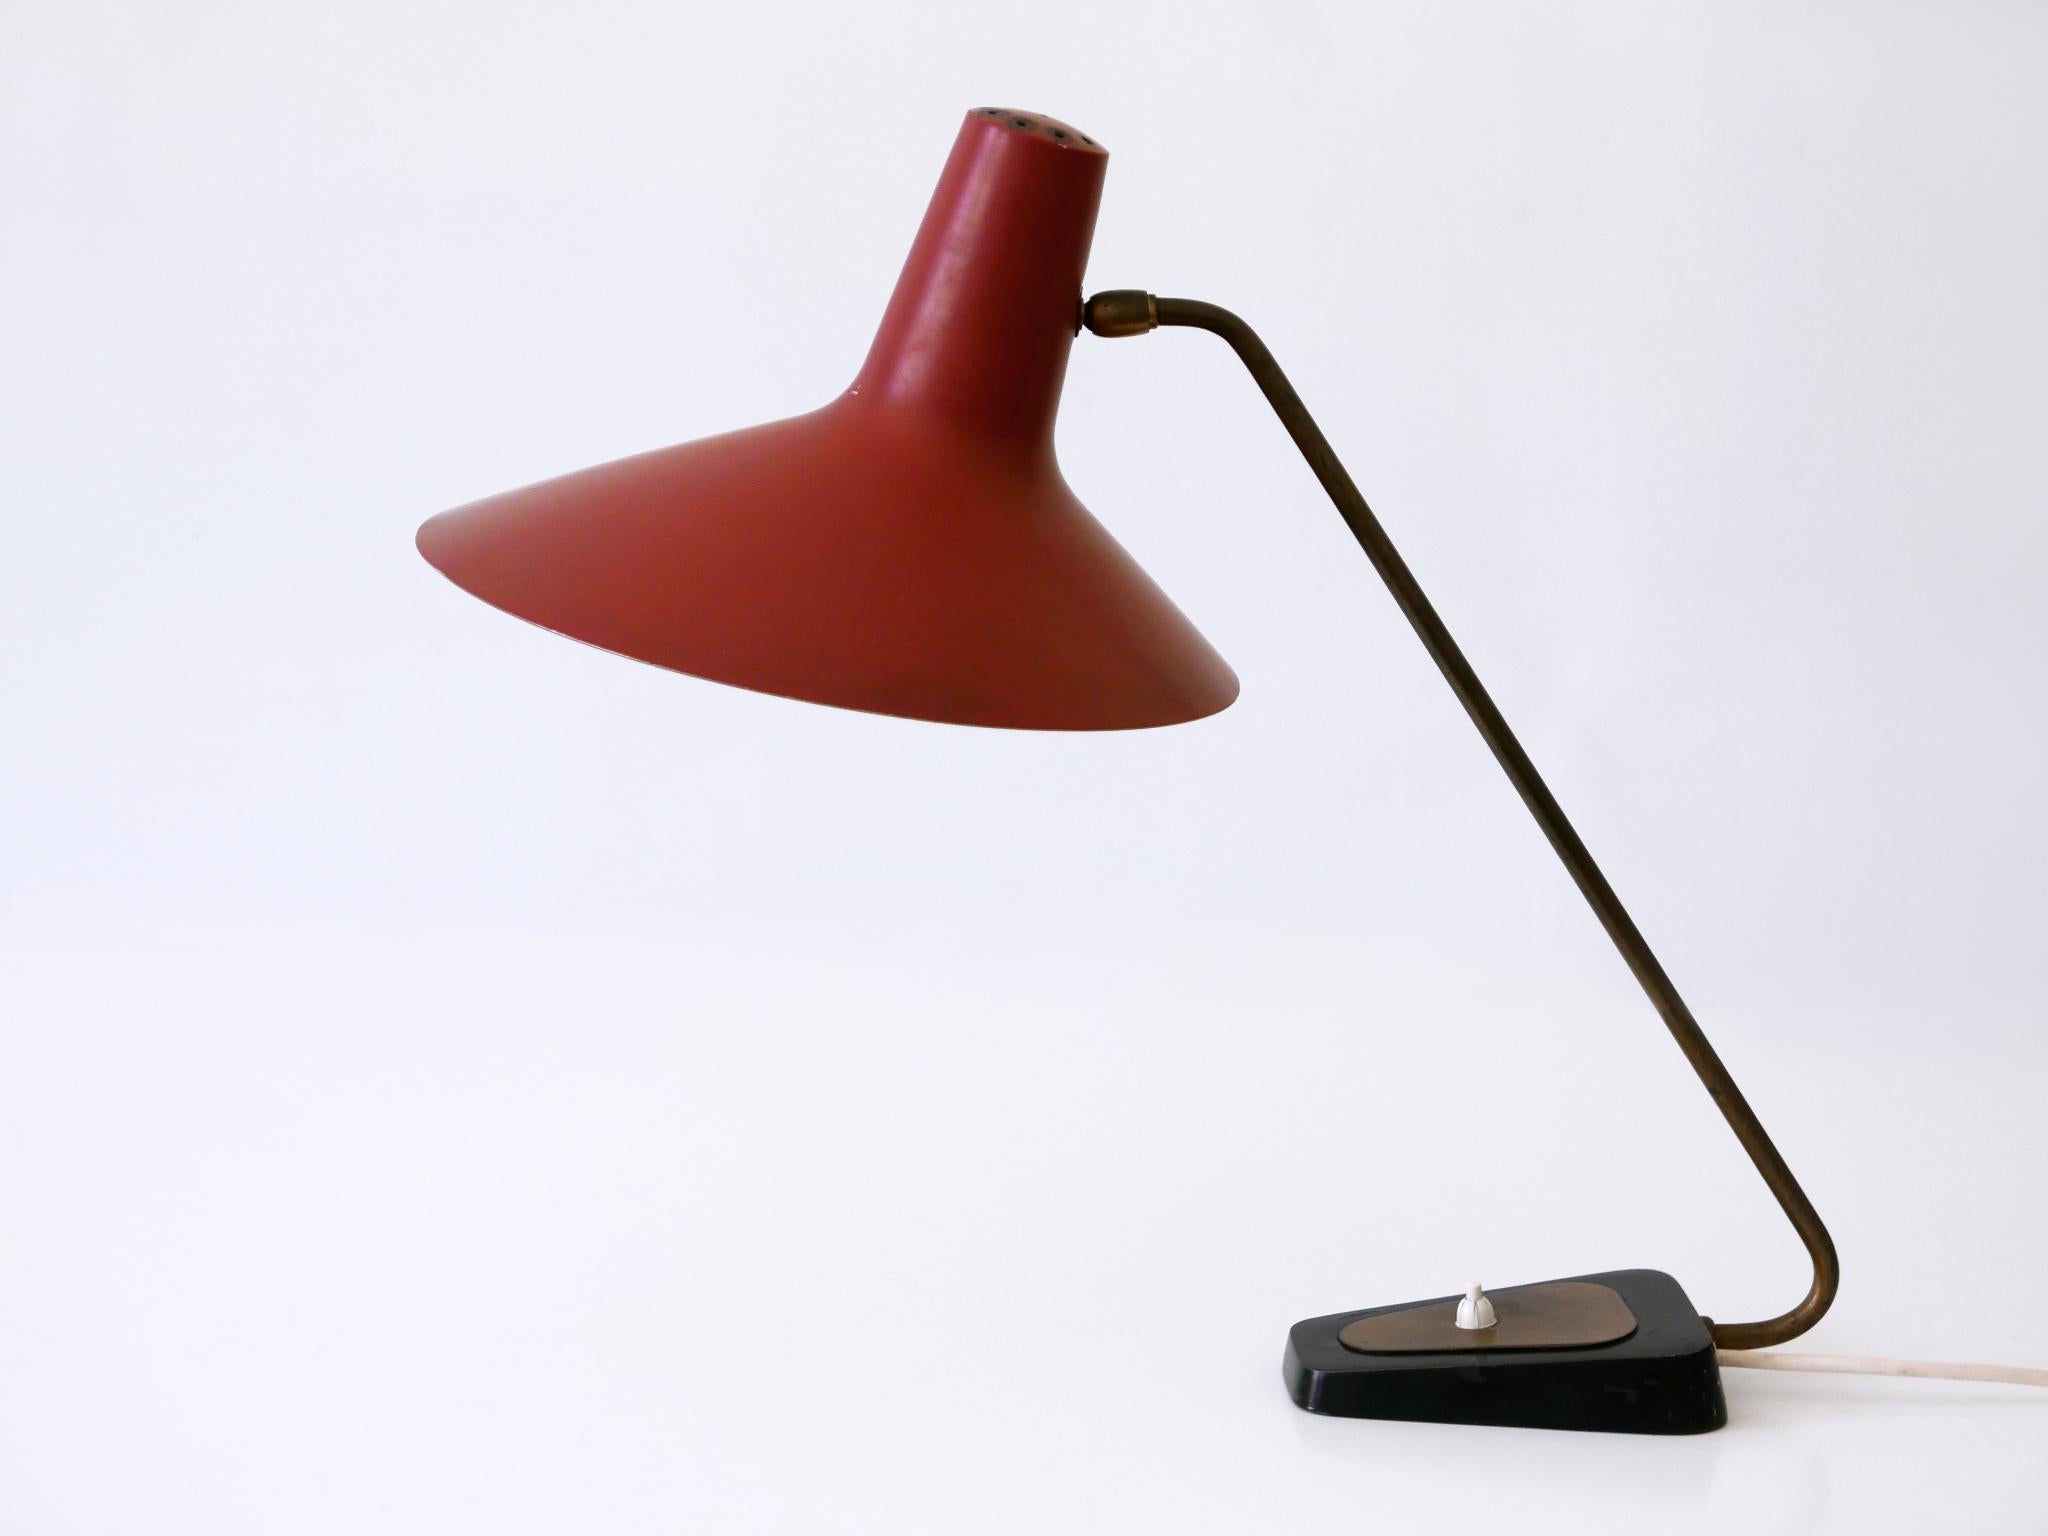 Exceptional Mid-Century Modern Table Lamp by Gebrüder Cosack Germany 1950s For Sale 7